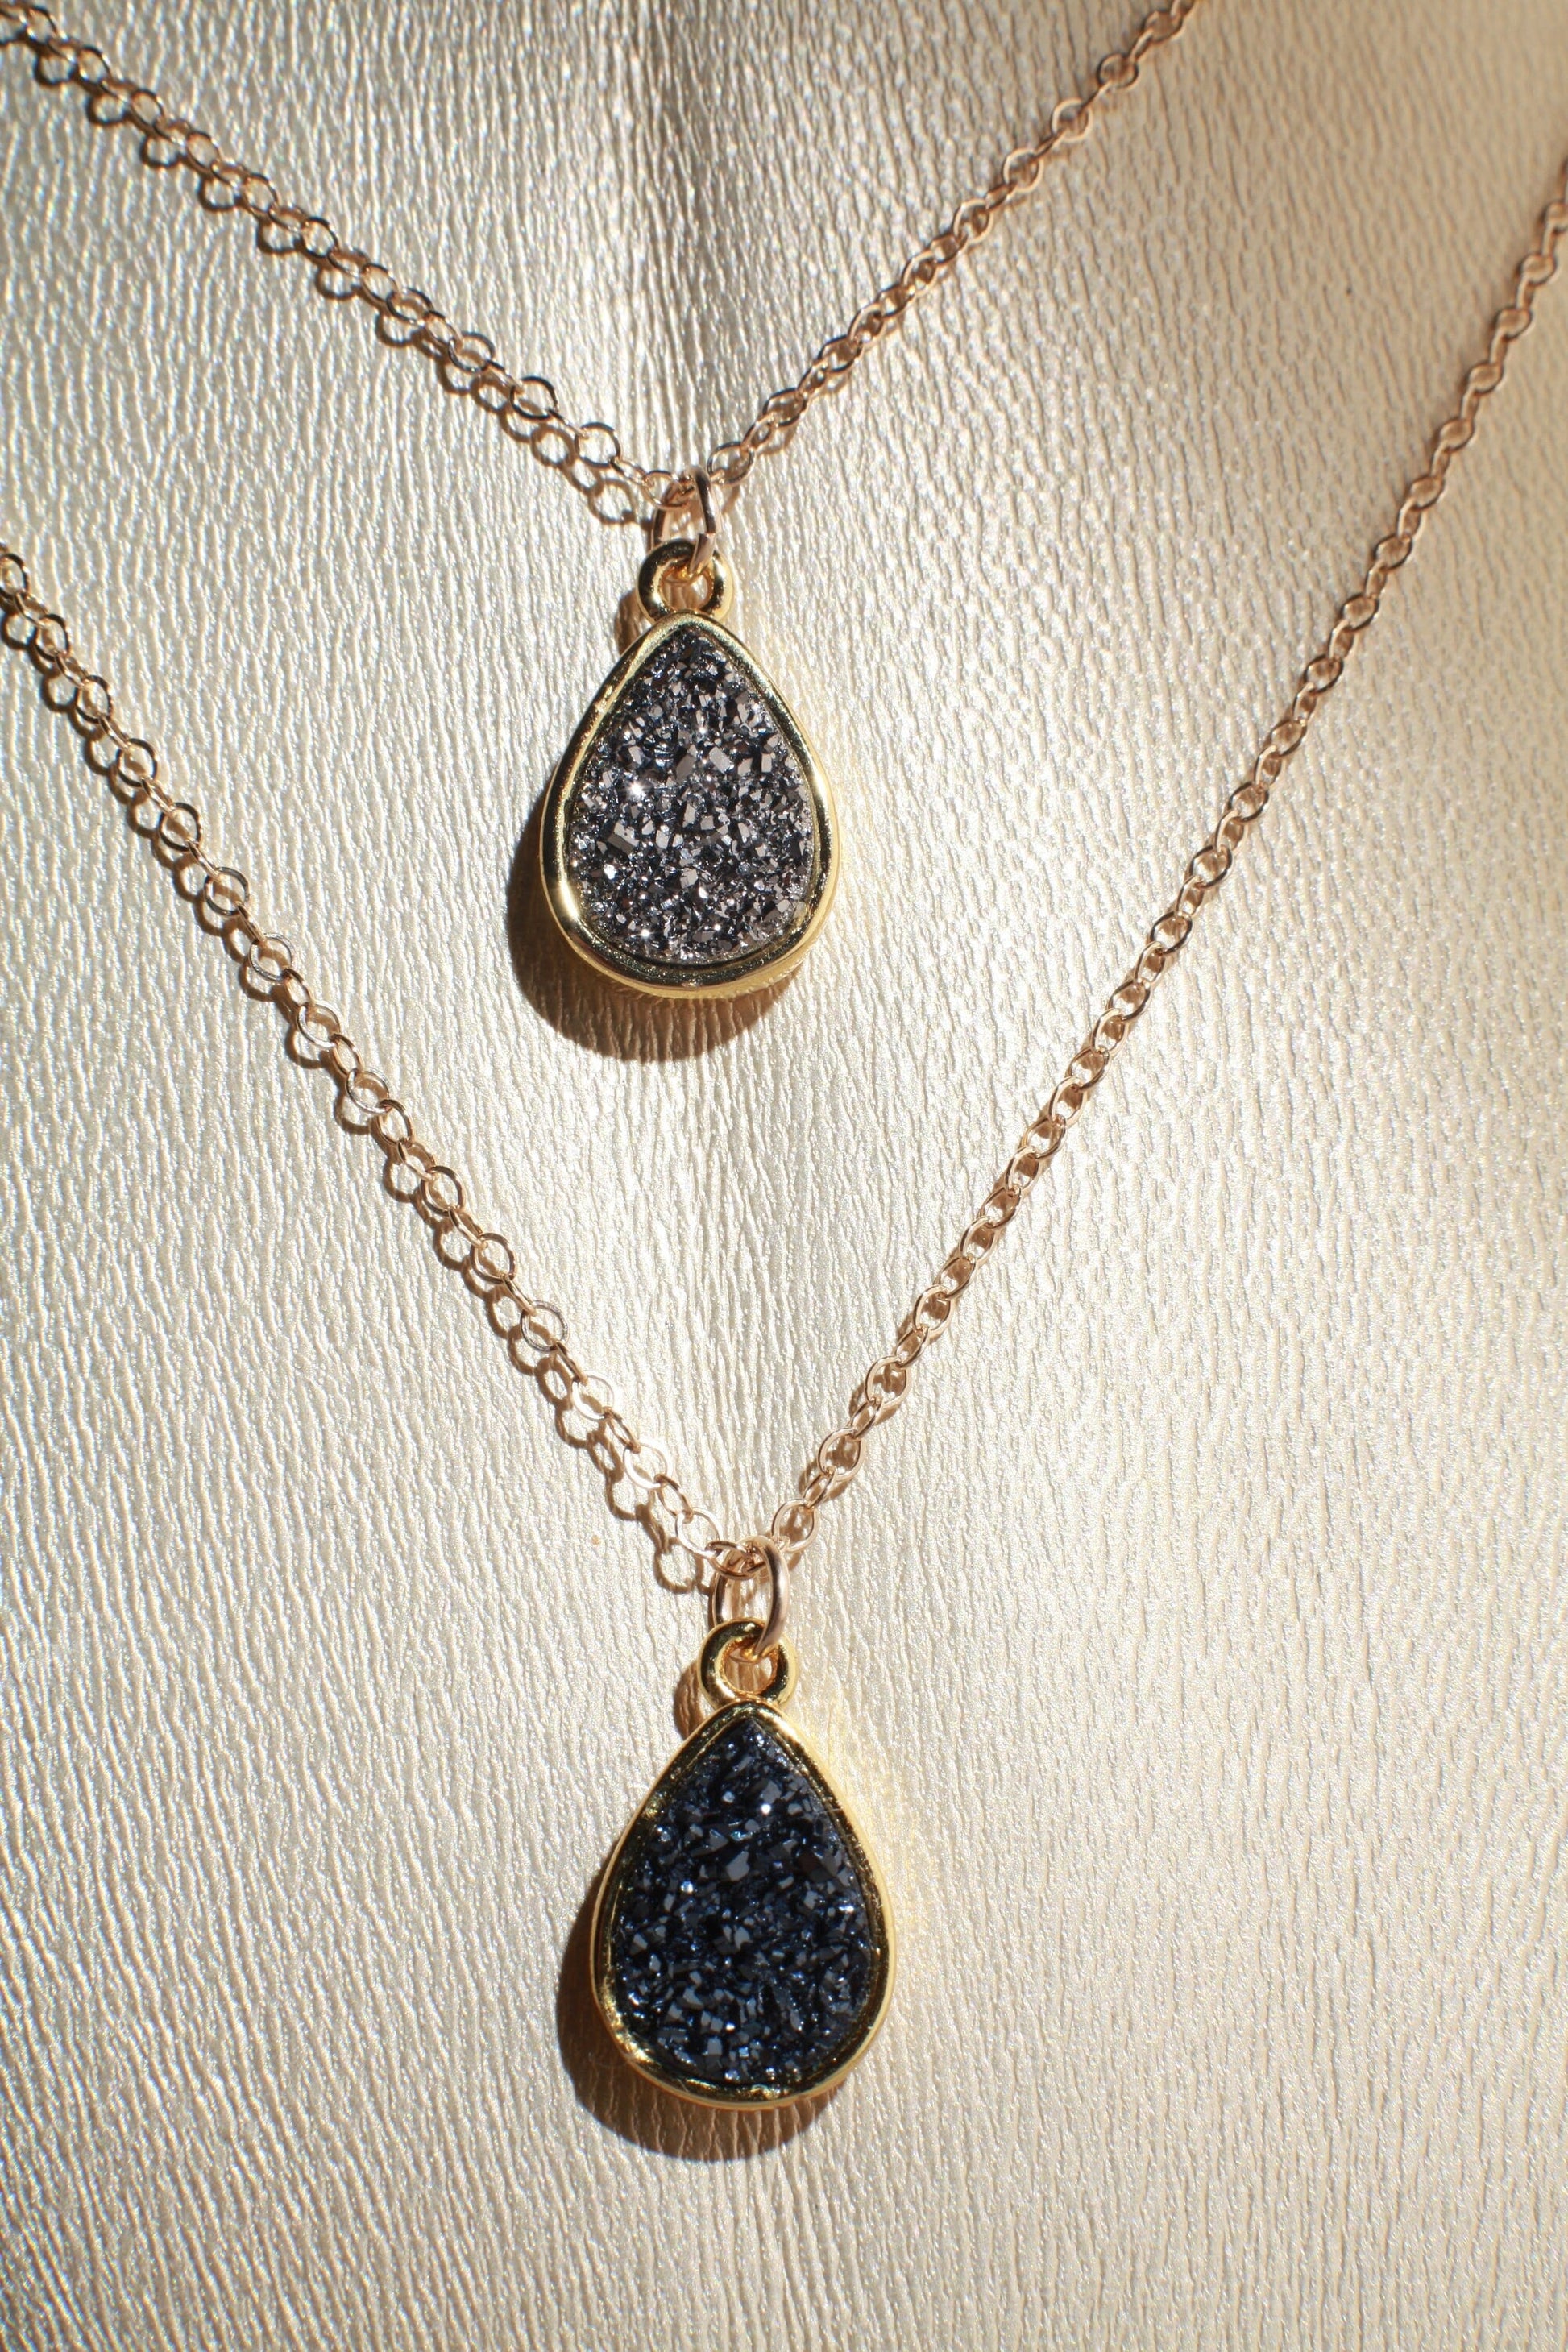 Druzy Geode Gemstone Pendant in 4 colors of Purple, Gold, Silver, Dark Navy Blue Sparkly, 14K Gold Filled Chain, 14&quot;, 16&quot;, 18&quot;,20&quot; Necklace